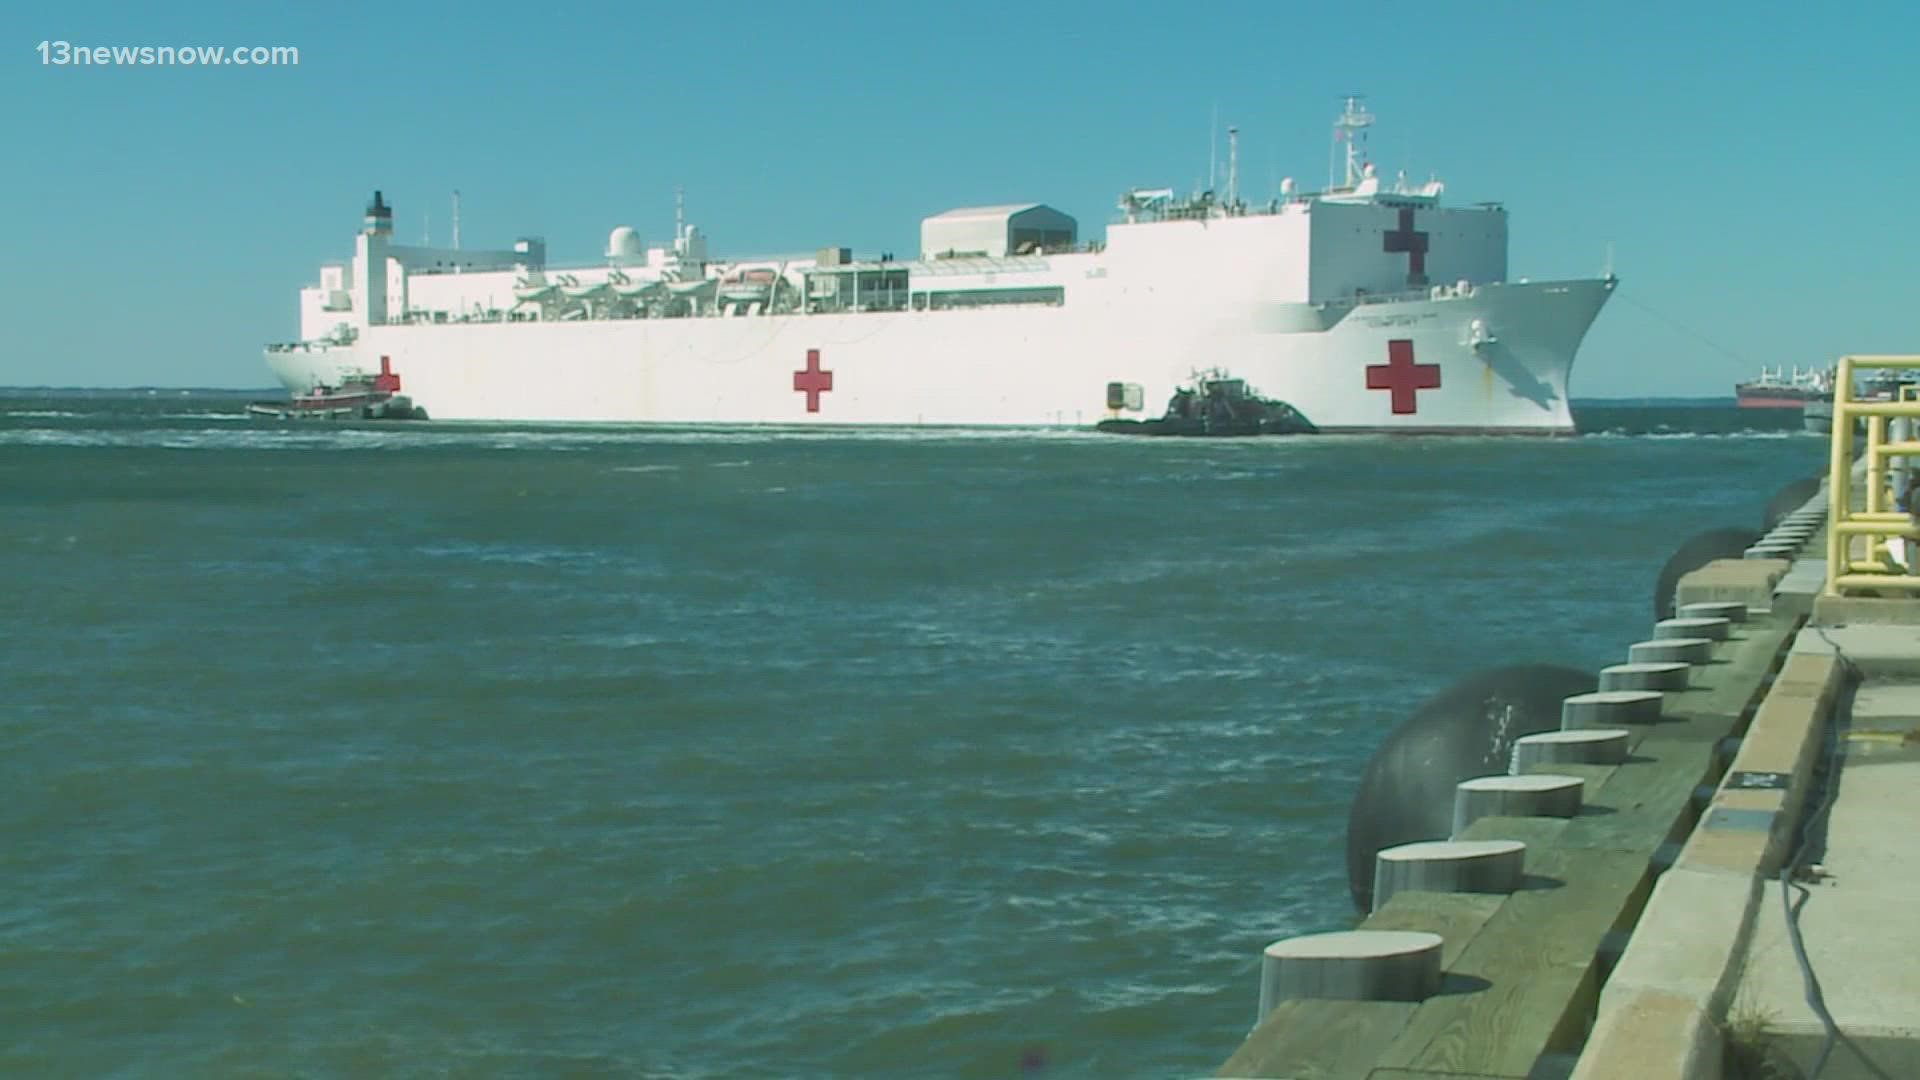 The hospital ship will visit five countries in Central and South America and the Caribbean Sea.